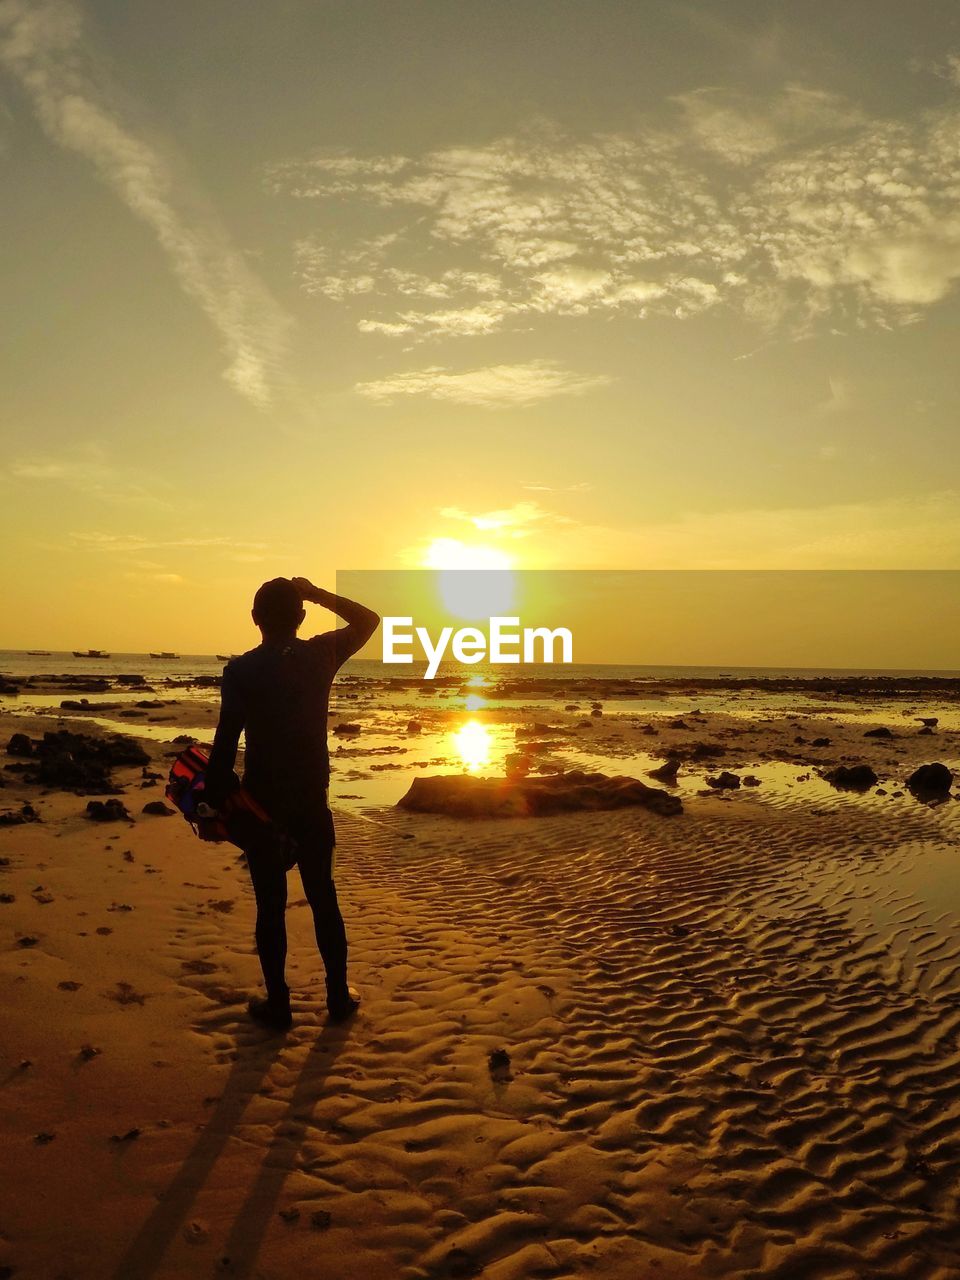 SILHOUETTE BOY STANDING ON BEACH AGAINST SKY DURING SUNSET